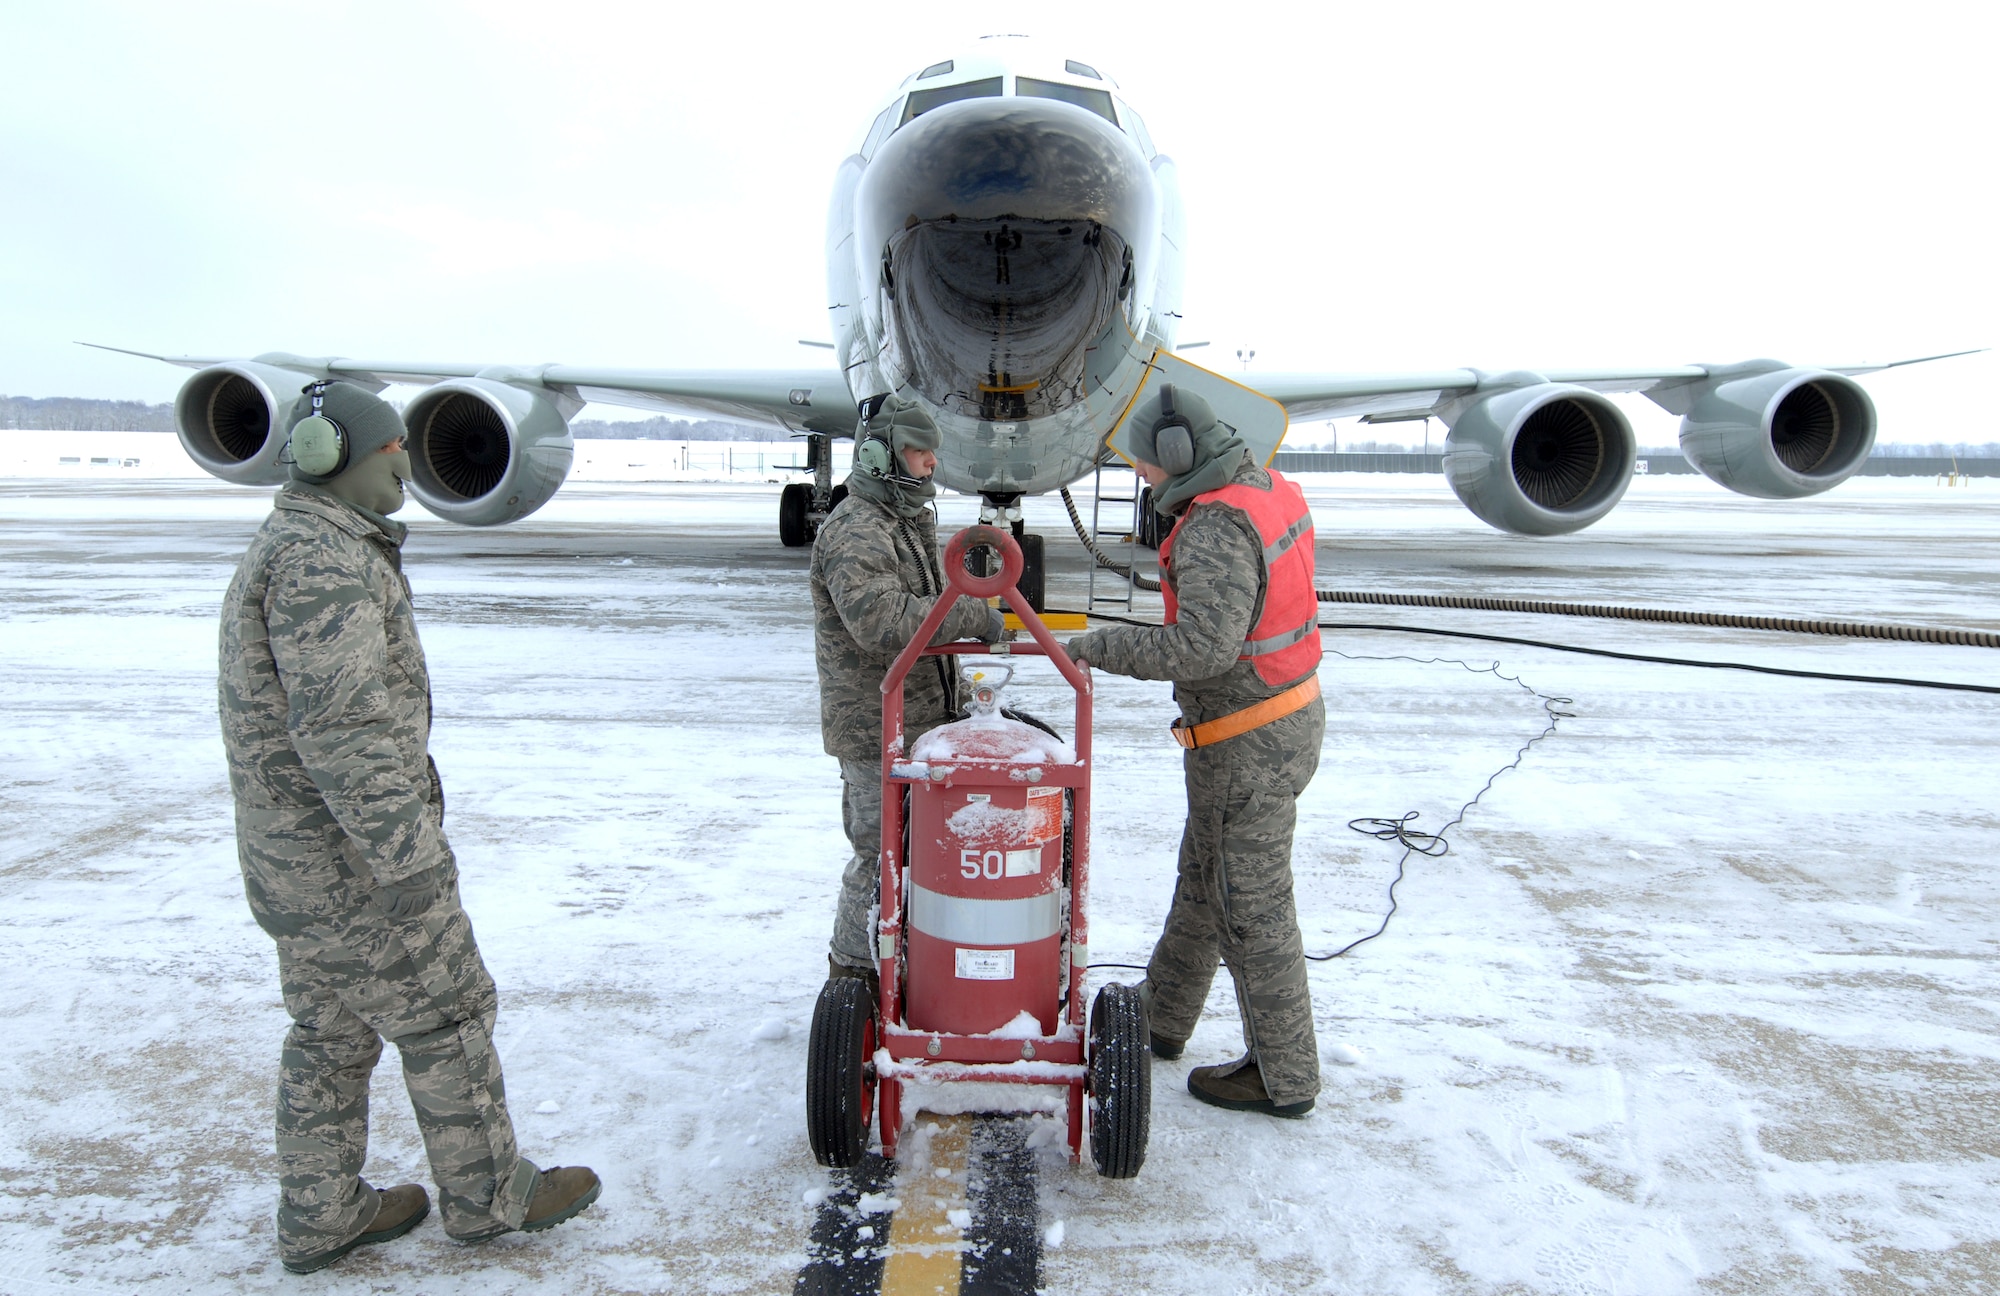 U.S. Air Force Staff Sgt. Vincent Vasquez, left, U.S. Air Force Airman 1st Class Jordan Scott and Senior Airman Jacob Bryson, right, standby while preparing an RC-135 Rivet Joint for launch Feb. 3 at Offutt Air Force Base Neb. Additional maintenance time is typically needed during winter operations to heat aircraft and to remove snow and ice from the aircraft prior to take-off.  They are all crew chiefs assigned to the 83rd Aircraft Maintenance Unit, 55 Aircraft Maintenance Squadron. (U.S. Air Force photo by Delanie Stafford/Released)